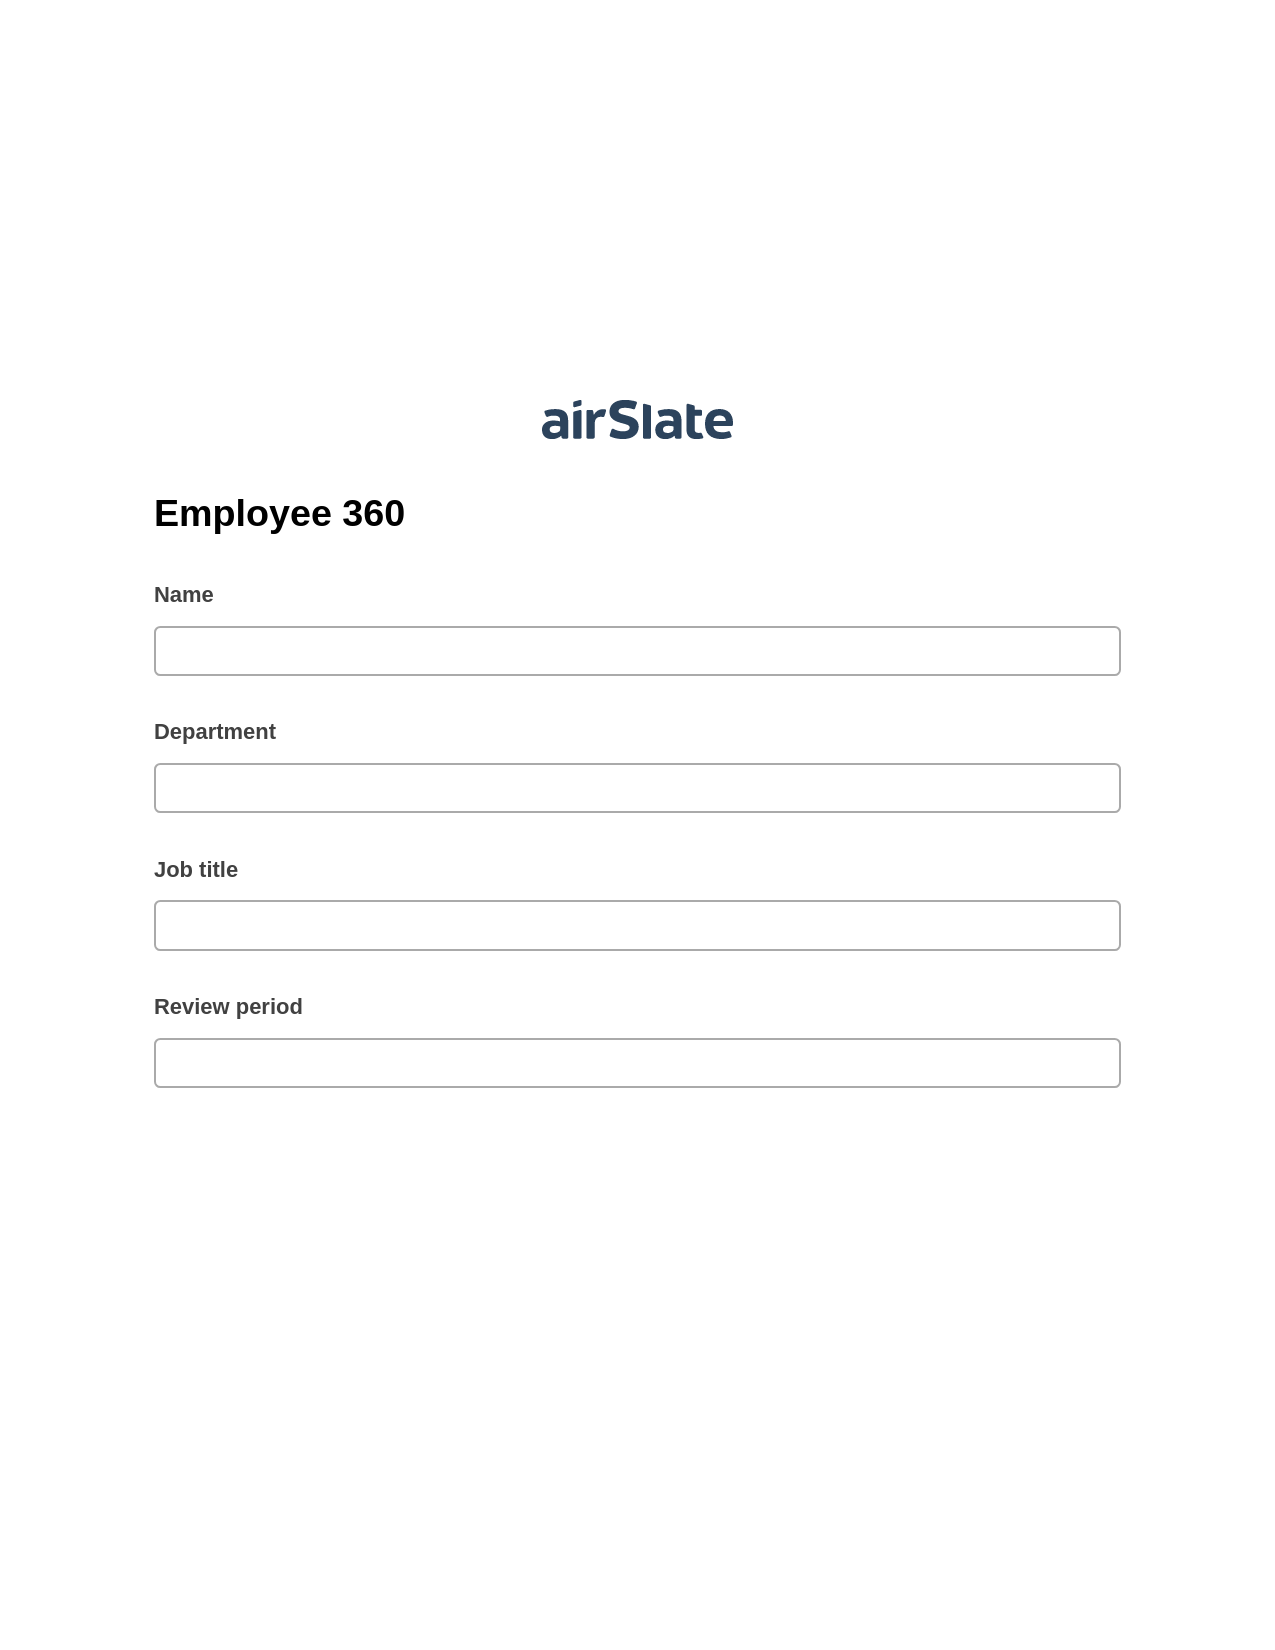 Multirole Employee 360 Pre-fill Dropdowns from Airtable, Update MS Dynamics 365 Record Bot, Export to Excel 365 Bot